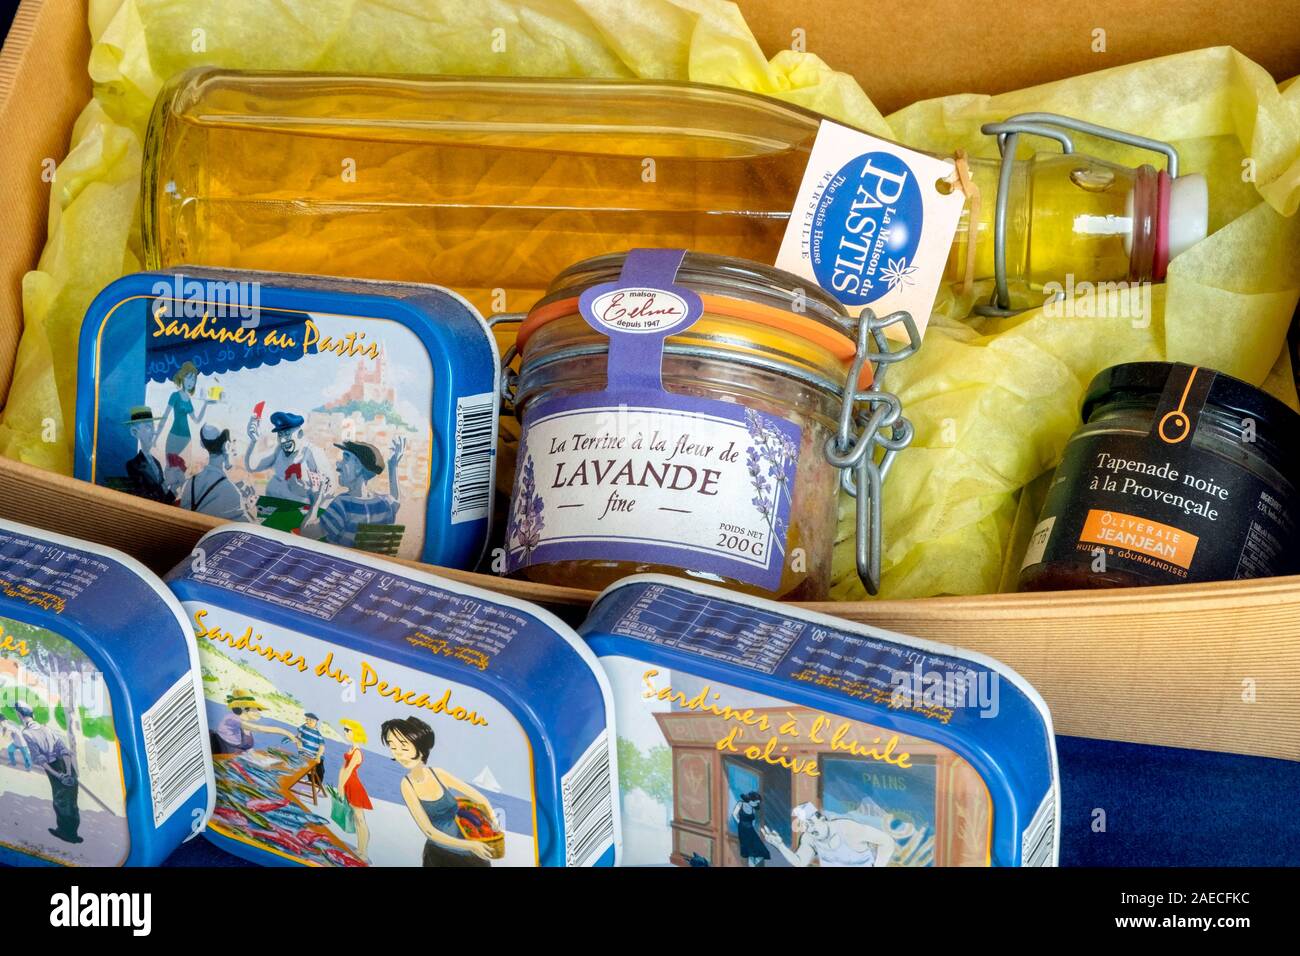 Bottle of Pastis with canned sardines and jars of lavande and tapenade, La Maison du Pastis, Vieux Port, Marseille, France, Europe Stock Photo